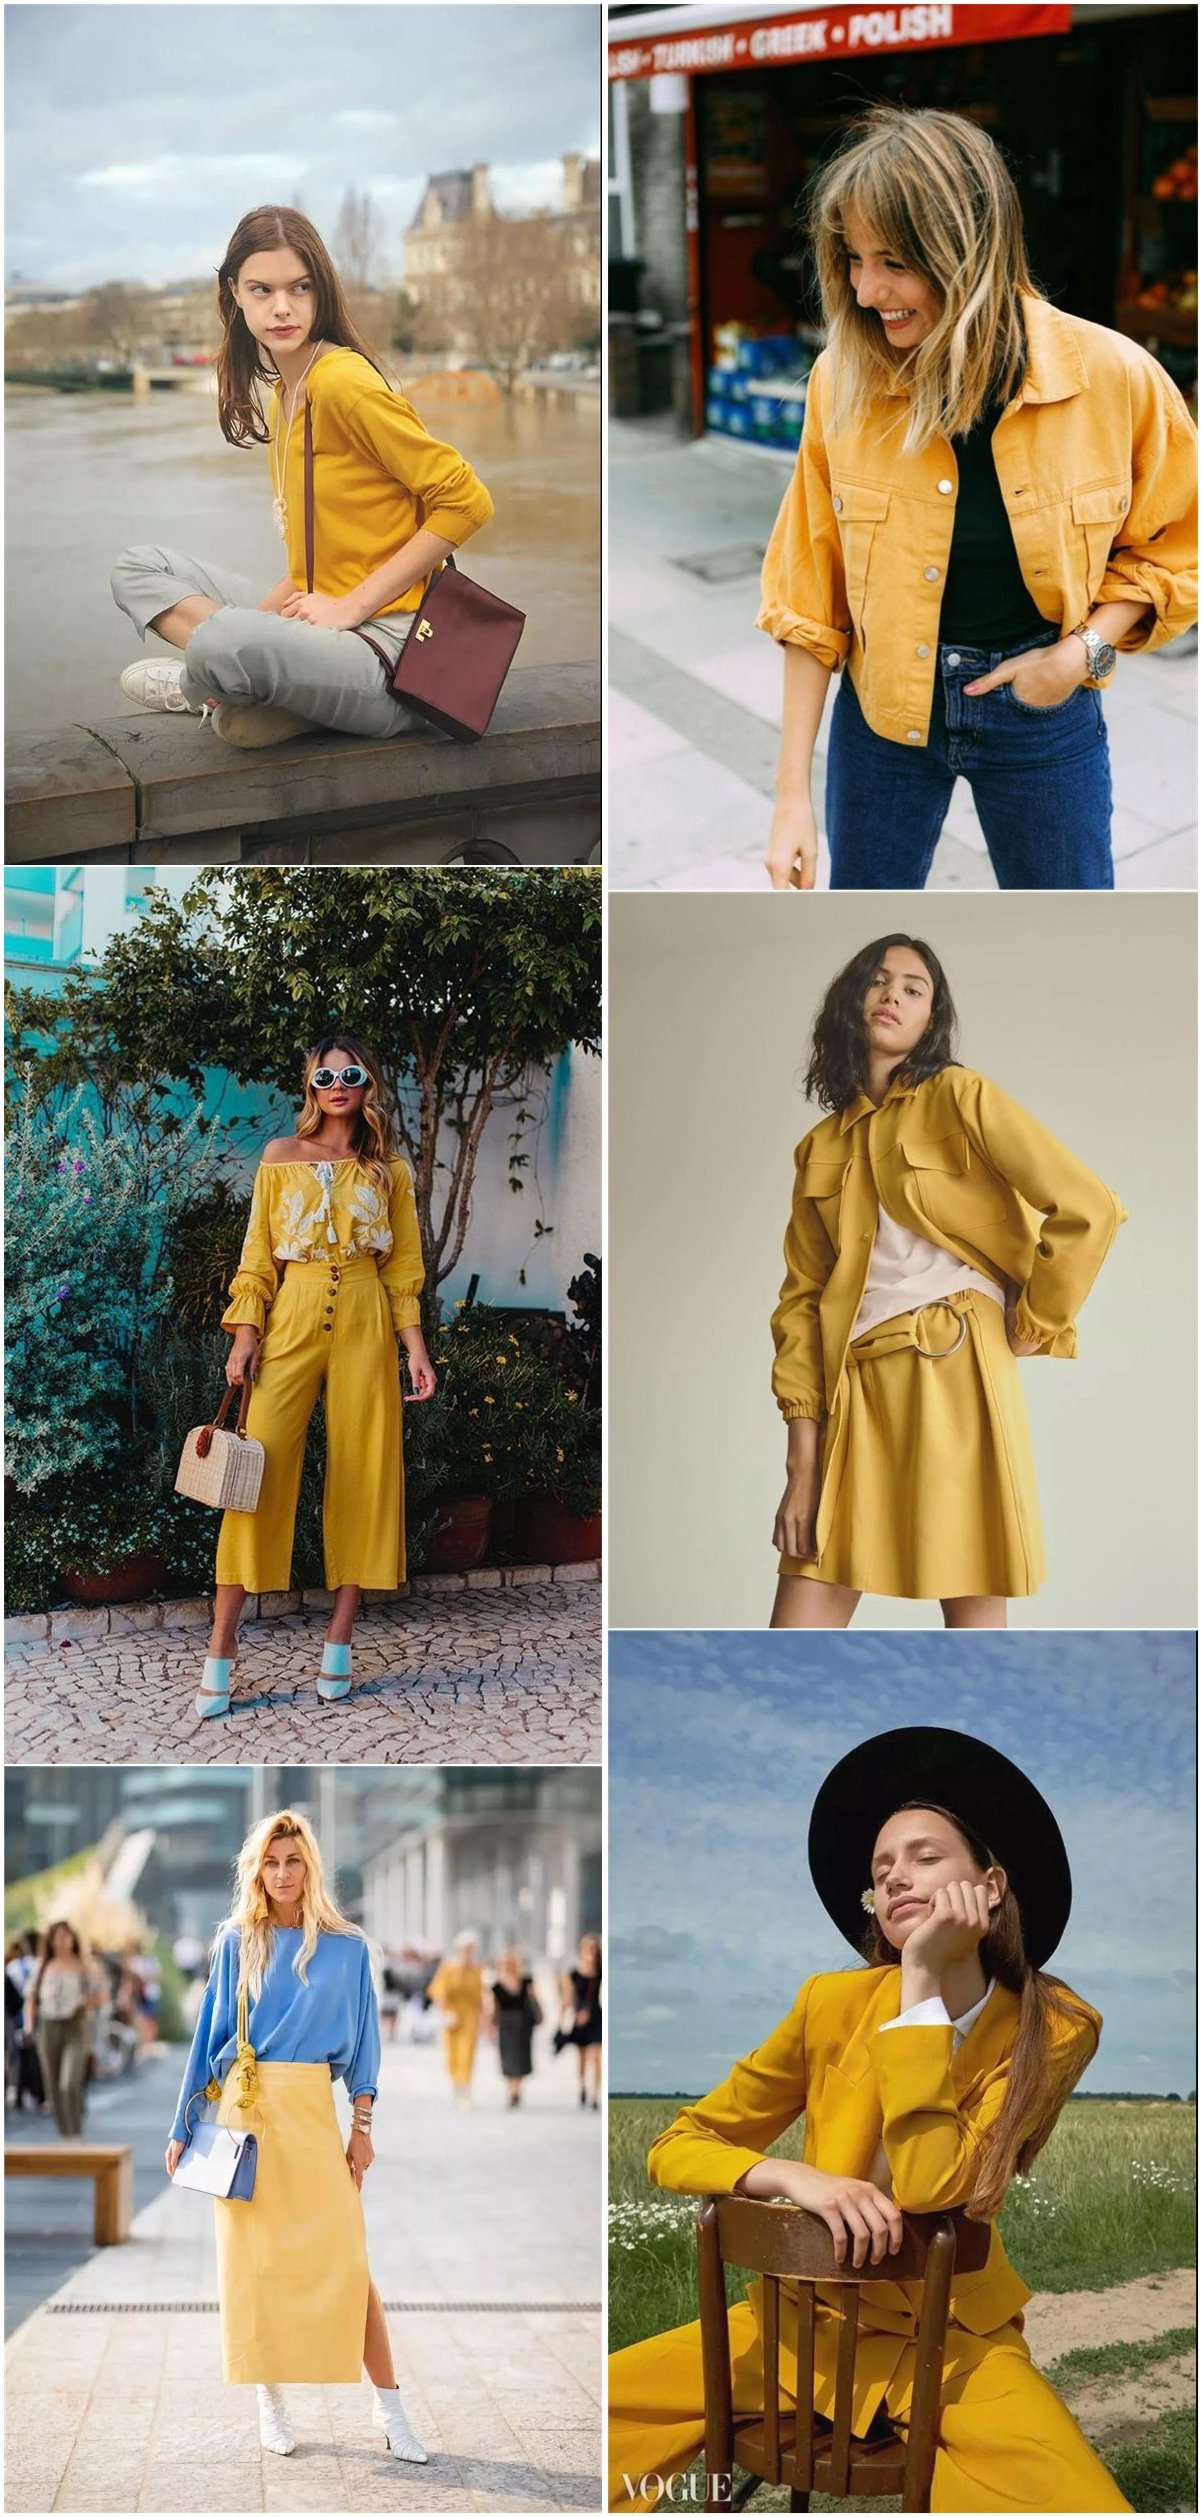 36 Trendy Yellow Outfits Ideas to Brighten up Your Day - Fancy Ideas ...